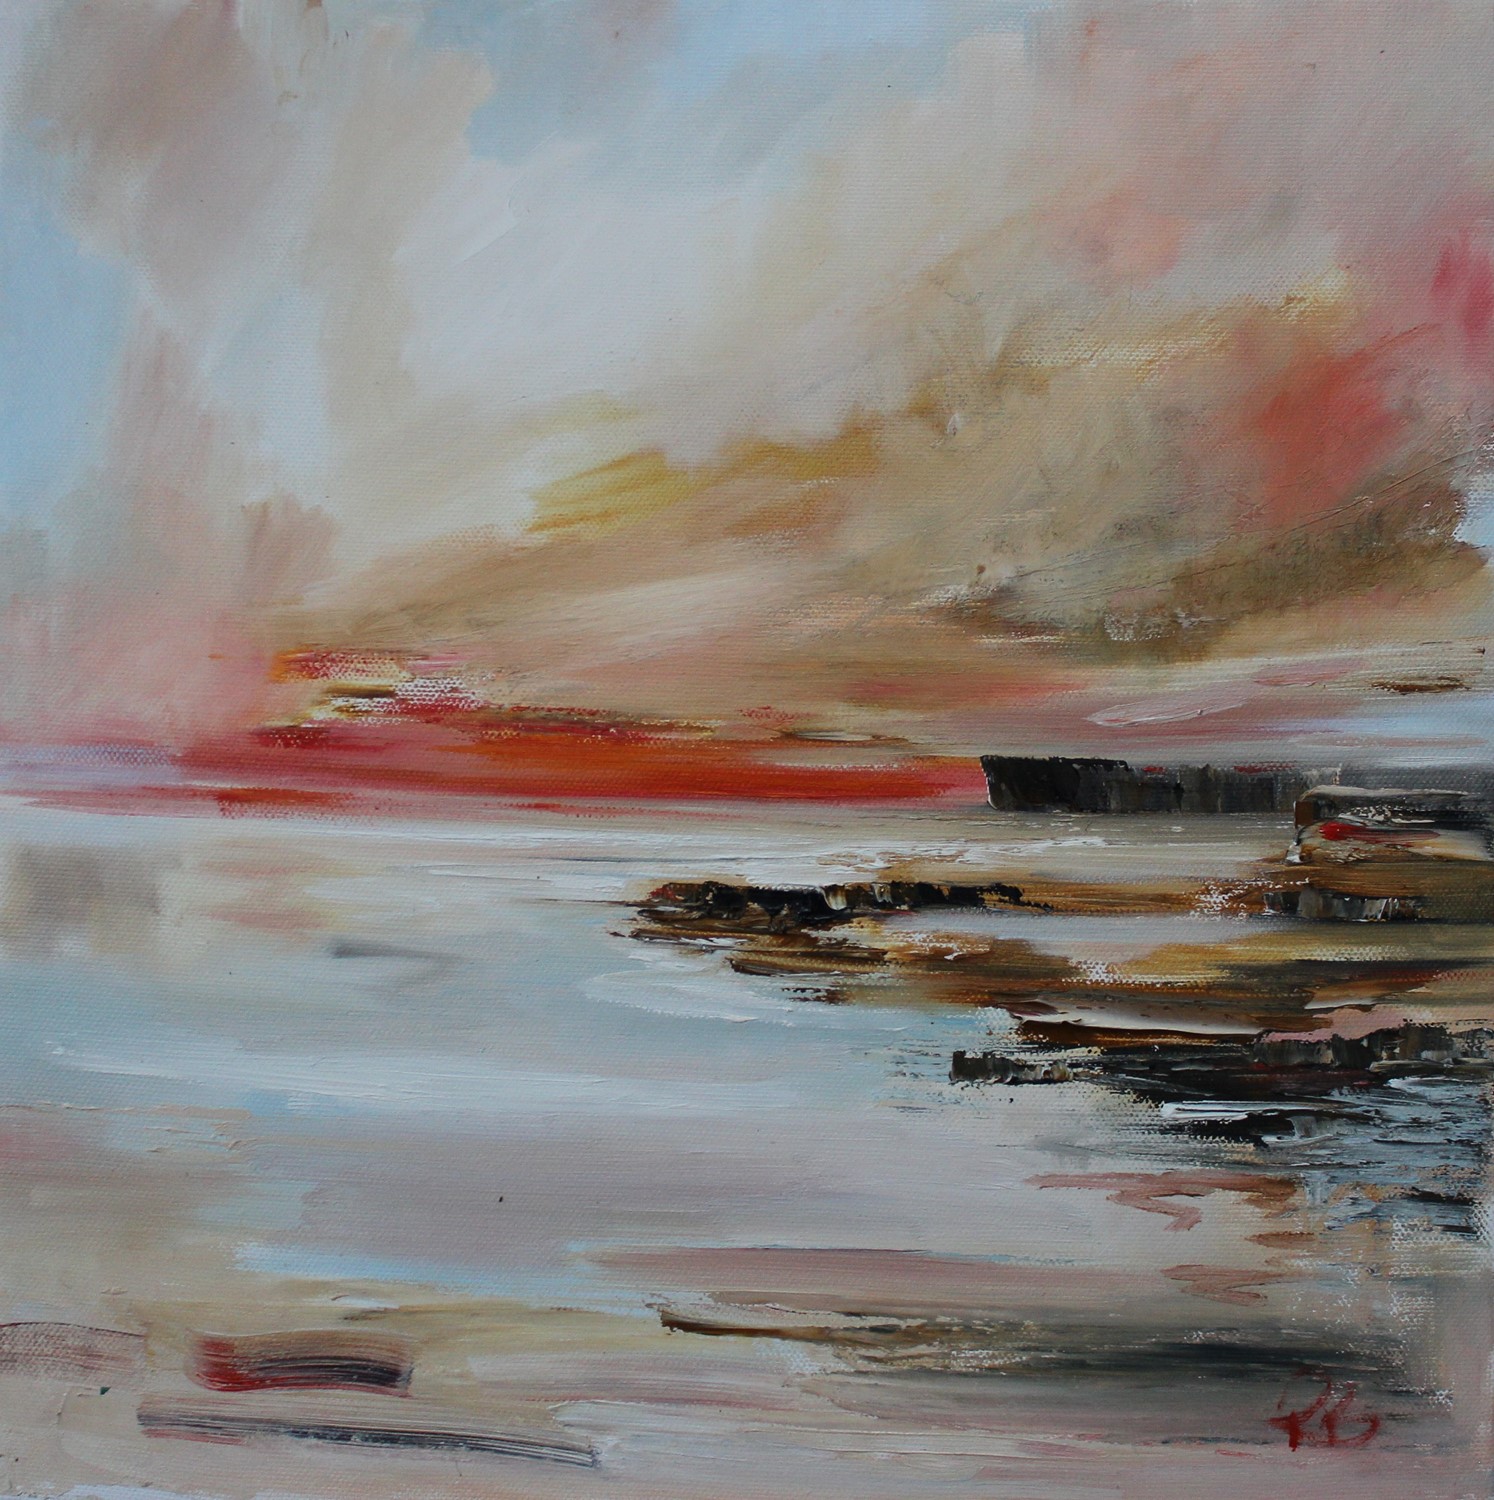 'When The Sunsets' by artist Rosanne Barr